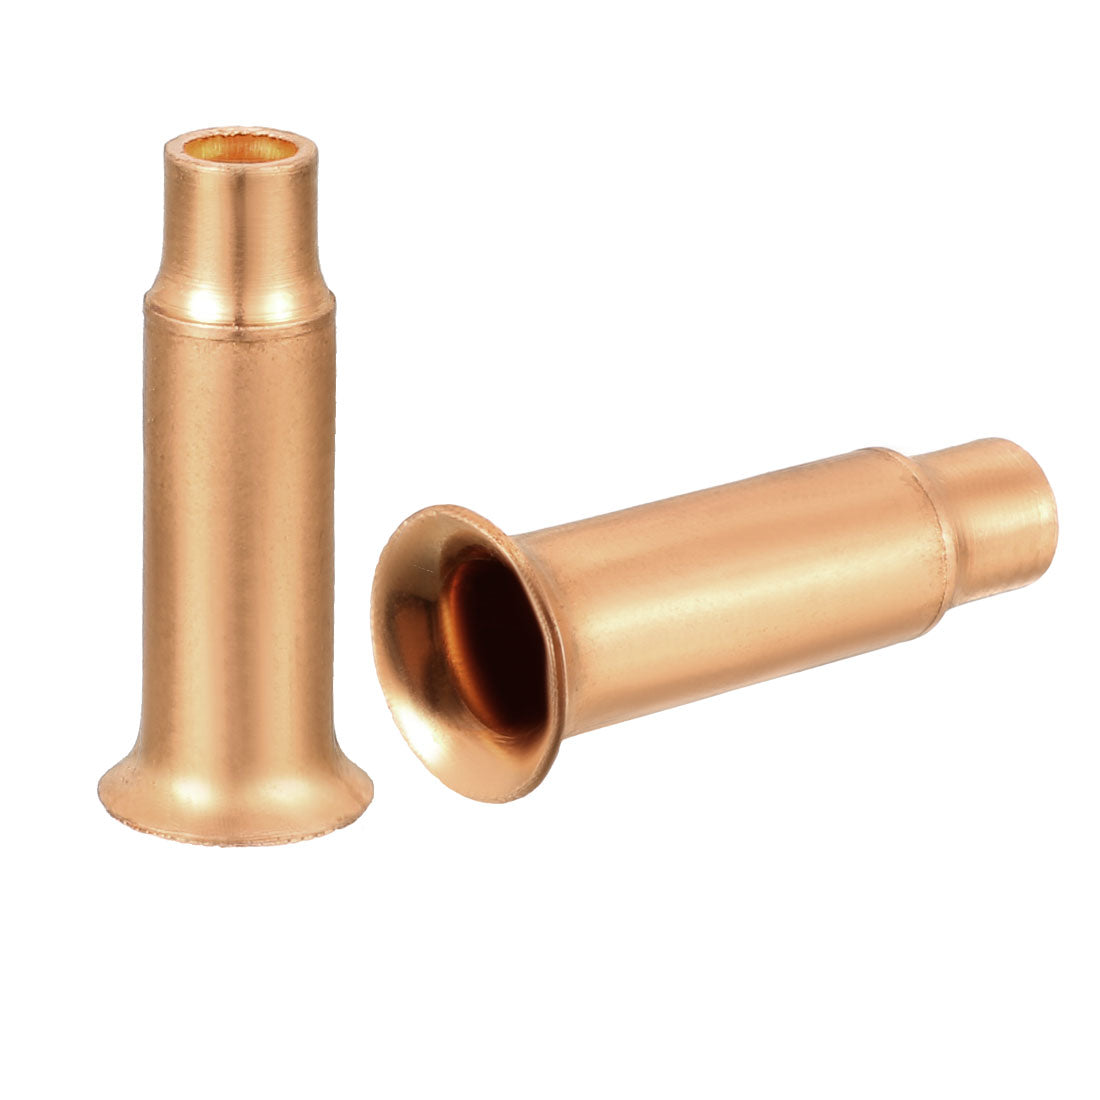 uxcell Uxcell Tube Flare Fitting Copper Tube 4.8mm OD 3.2mm ID for Refrigeration Tubing 15pcs